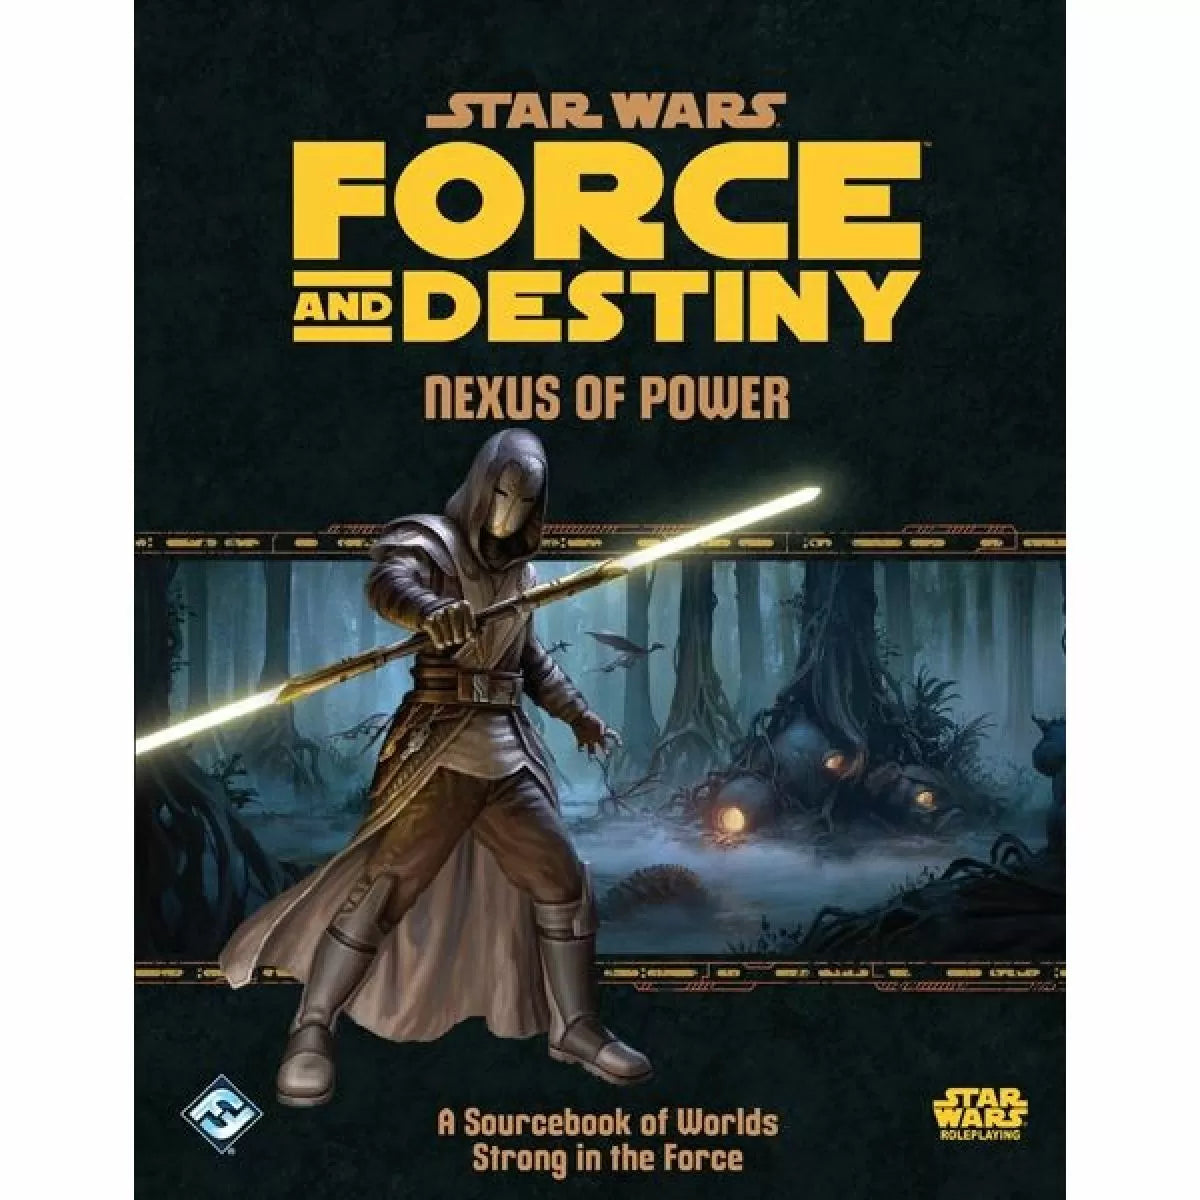 Star Wars RPG force and destiny Nexus of power